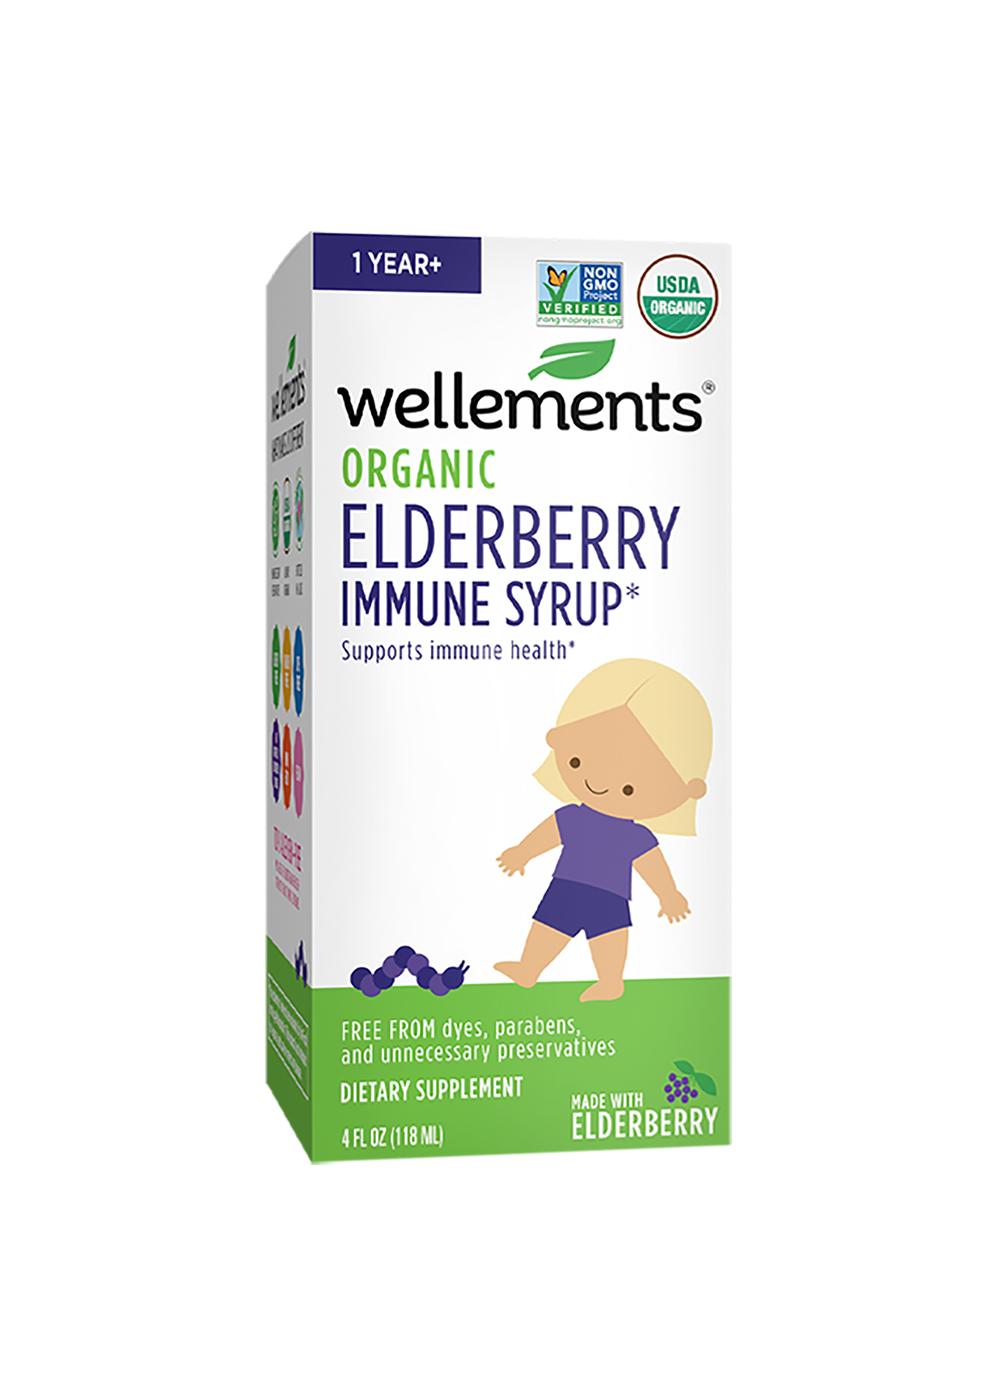 Wellements Organic Elderberry Immune Syrup; image 1 of 2